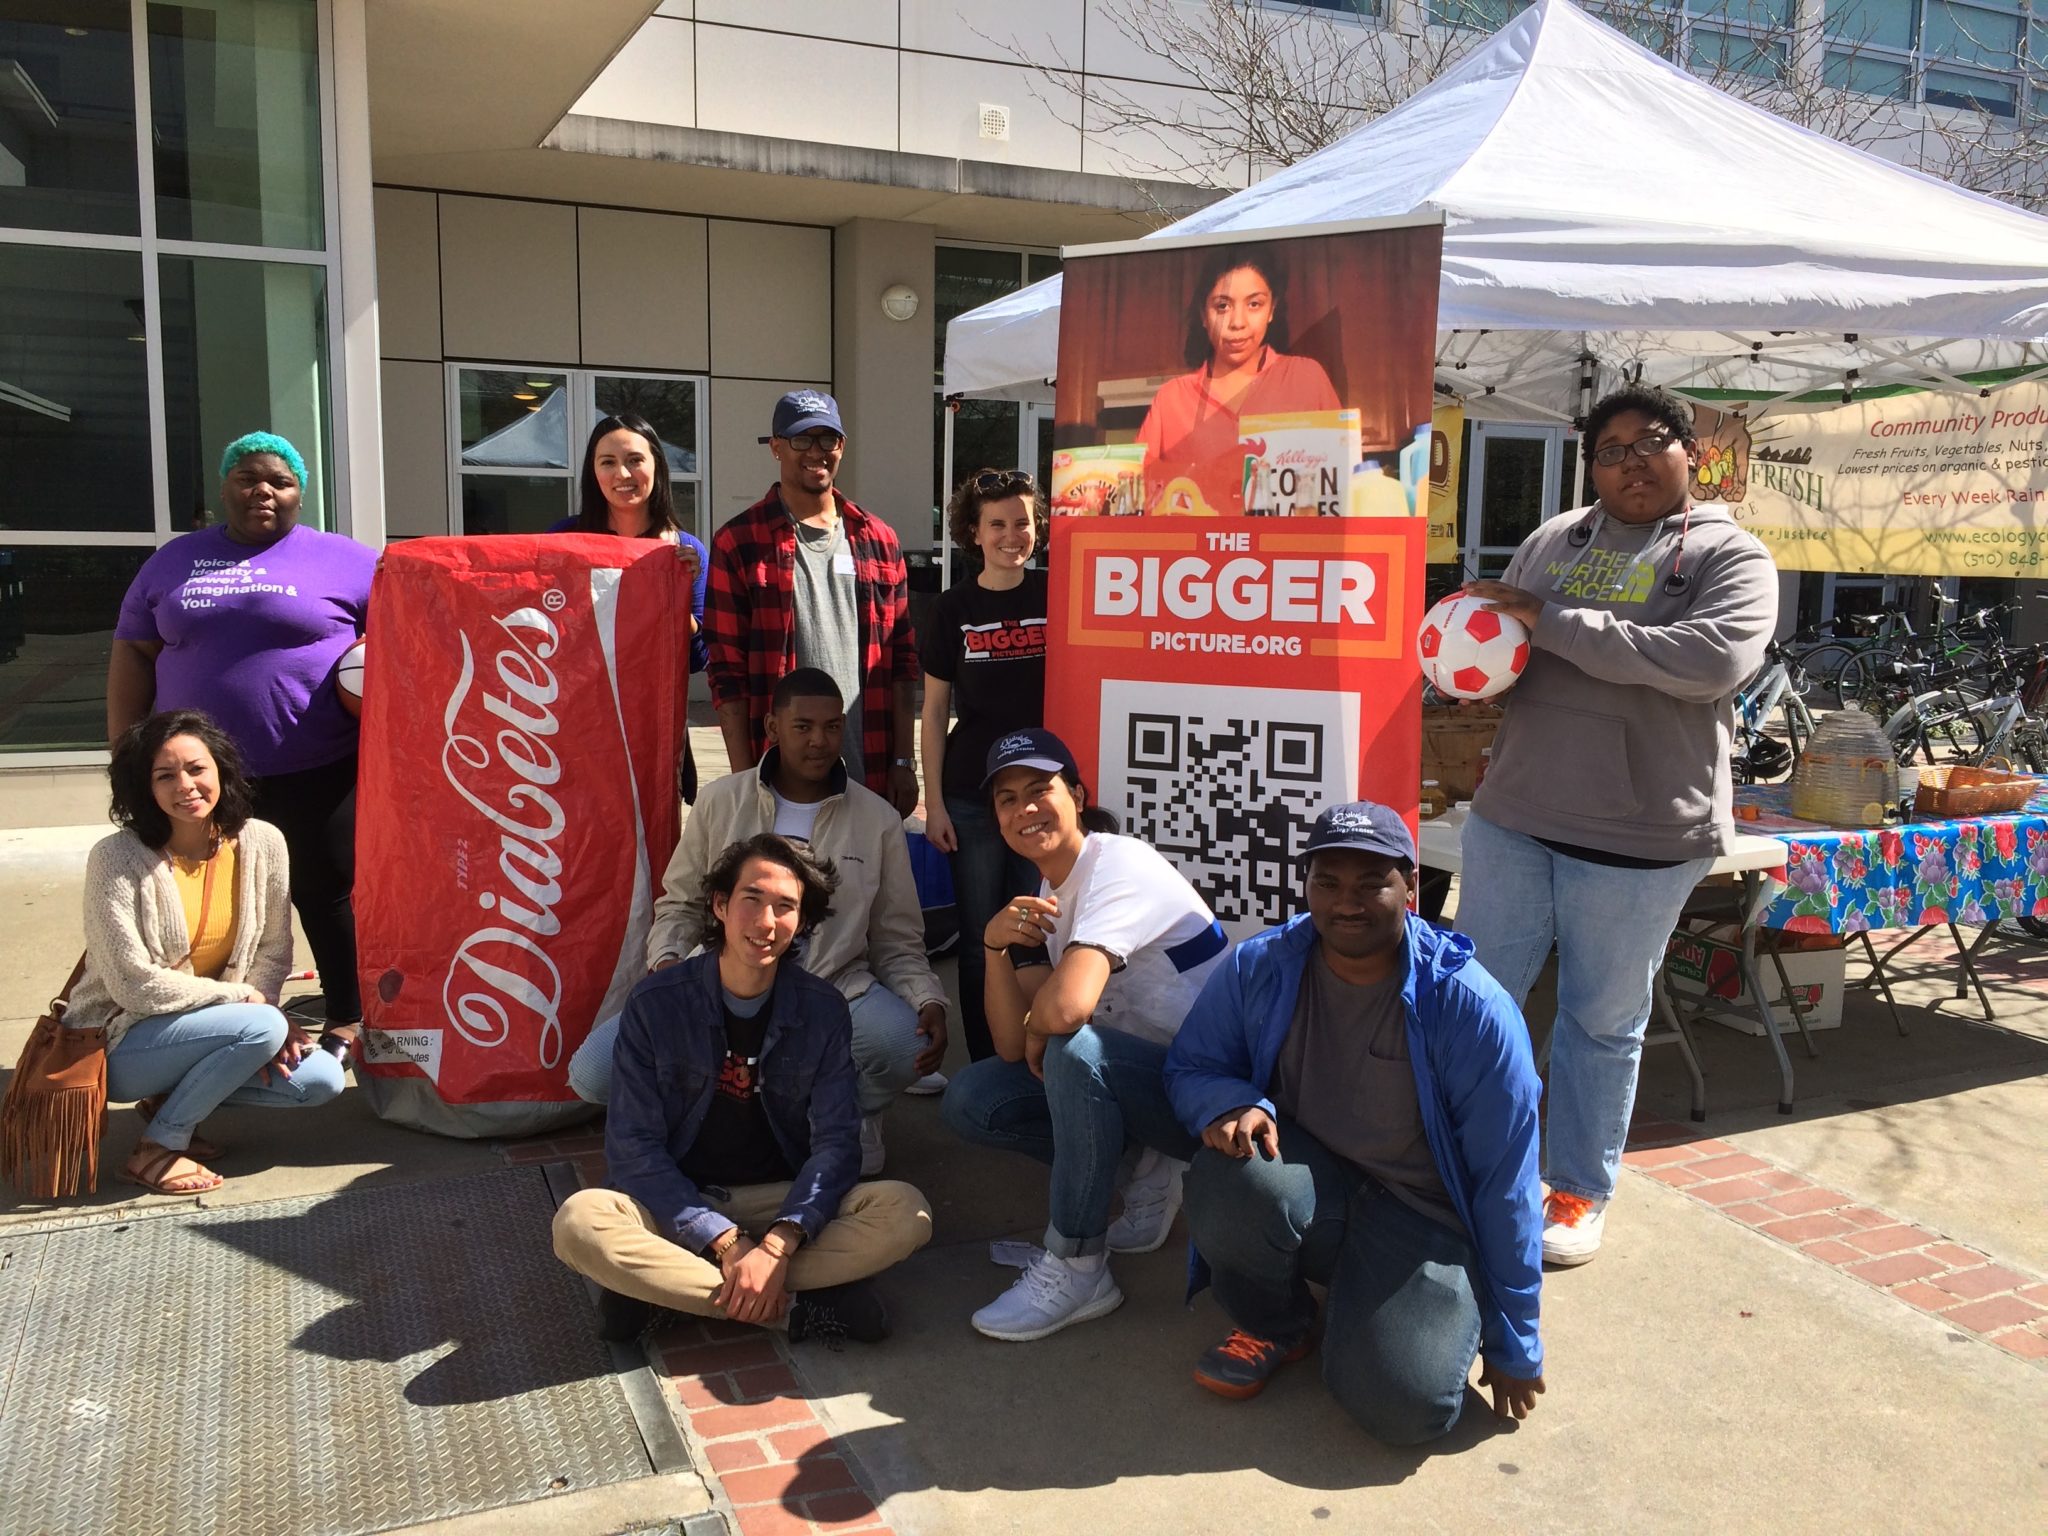 Youth Environmental Academy volunteers work at different outreach events to teach the community about the adverse health effects of sugar-sweetened beverages and share healthier food options. Photo by the Ecology Center.